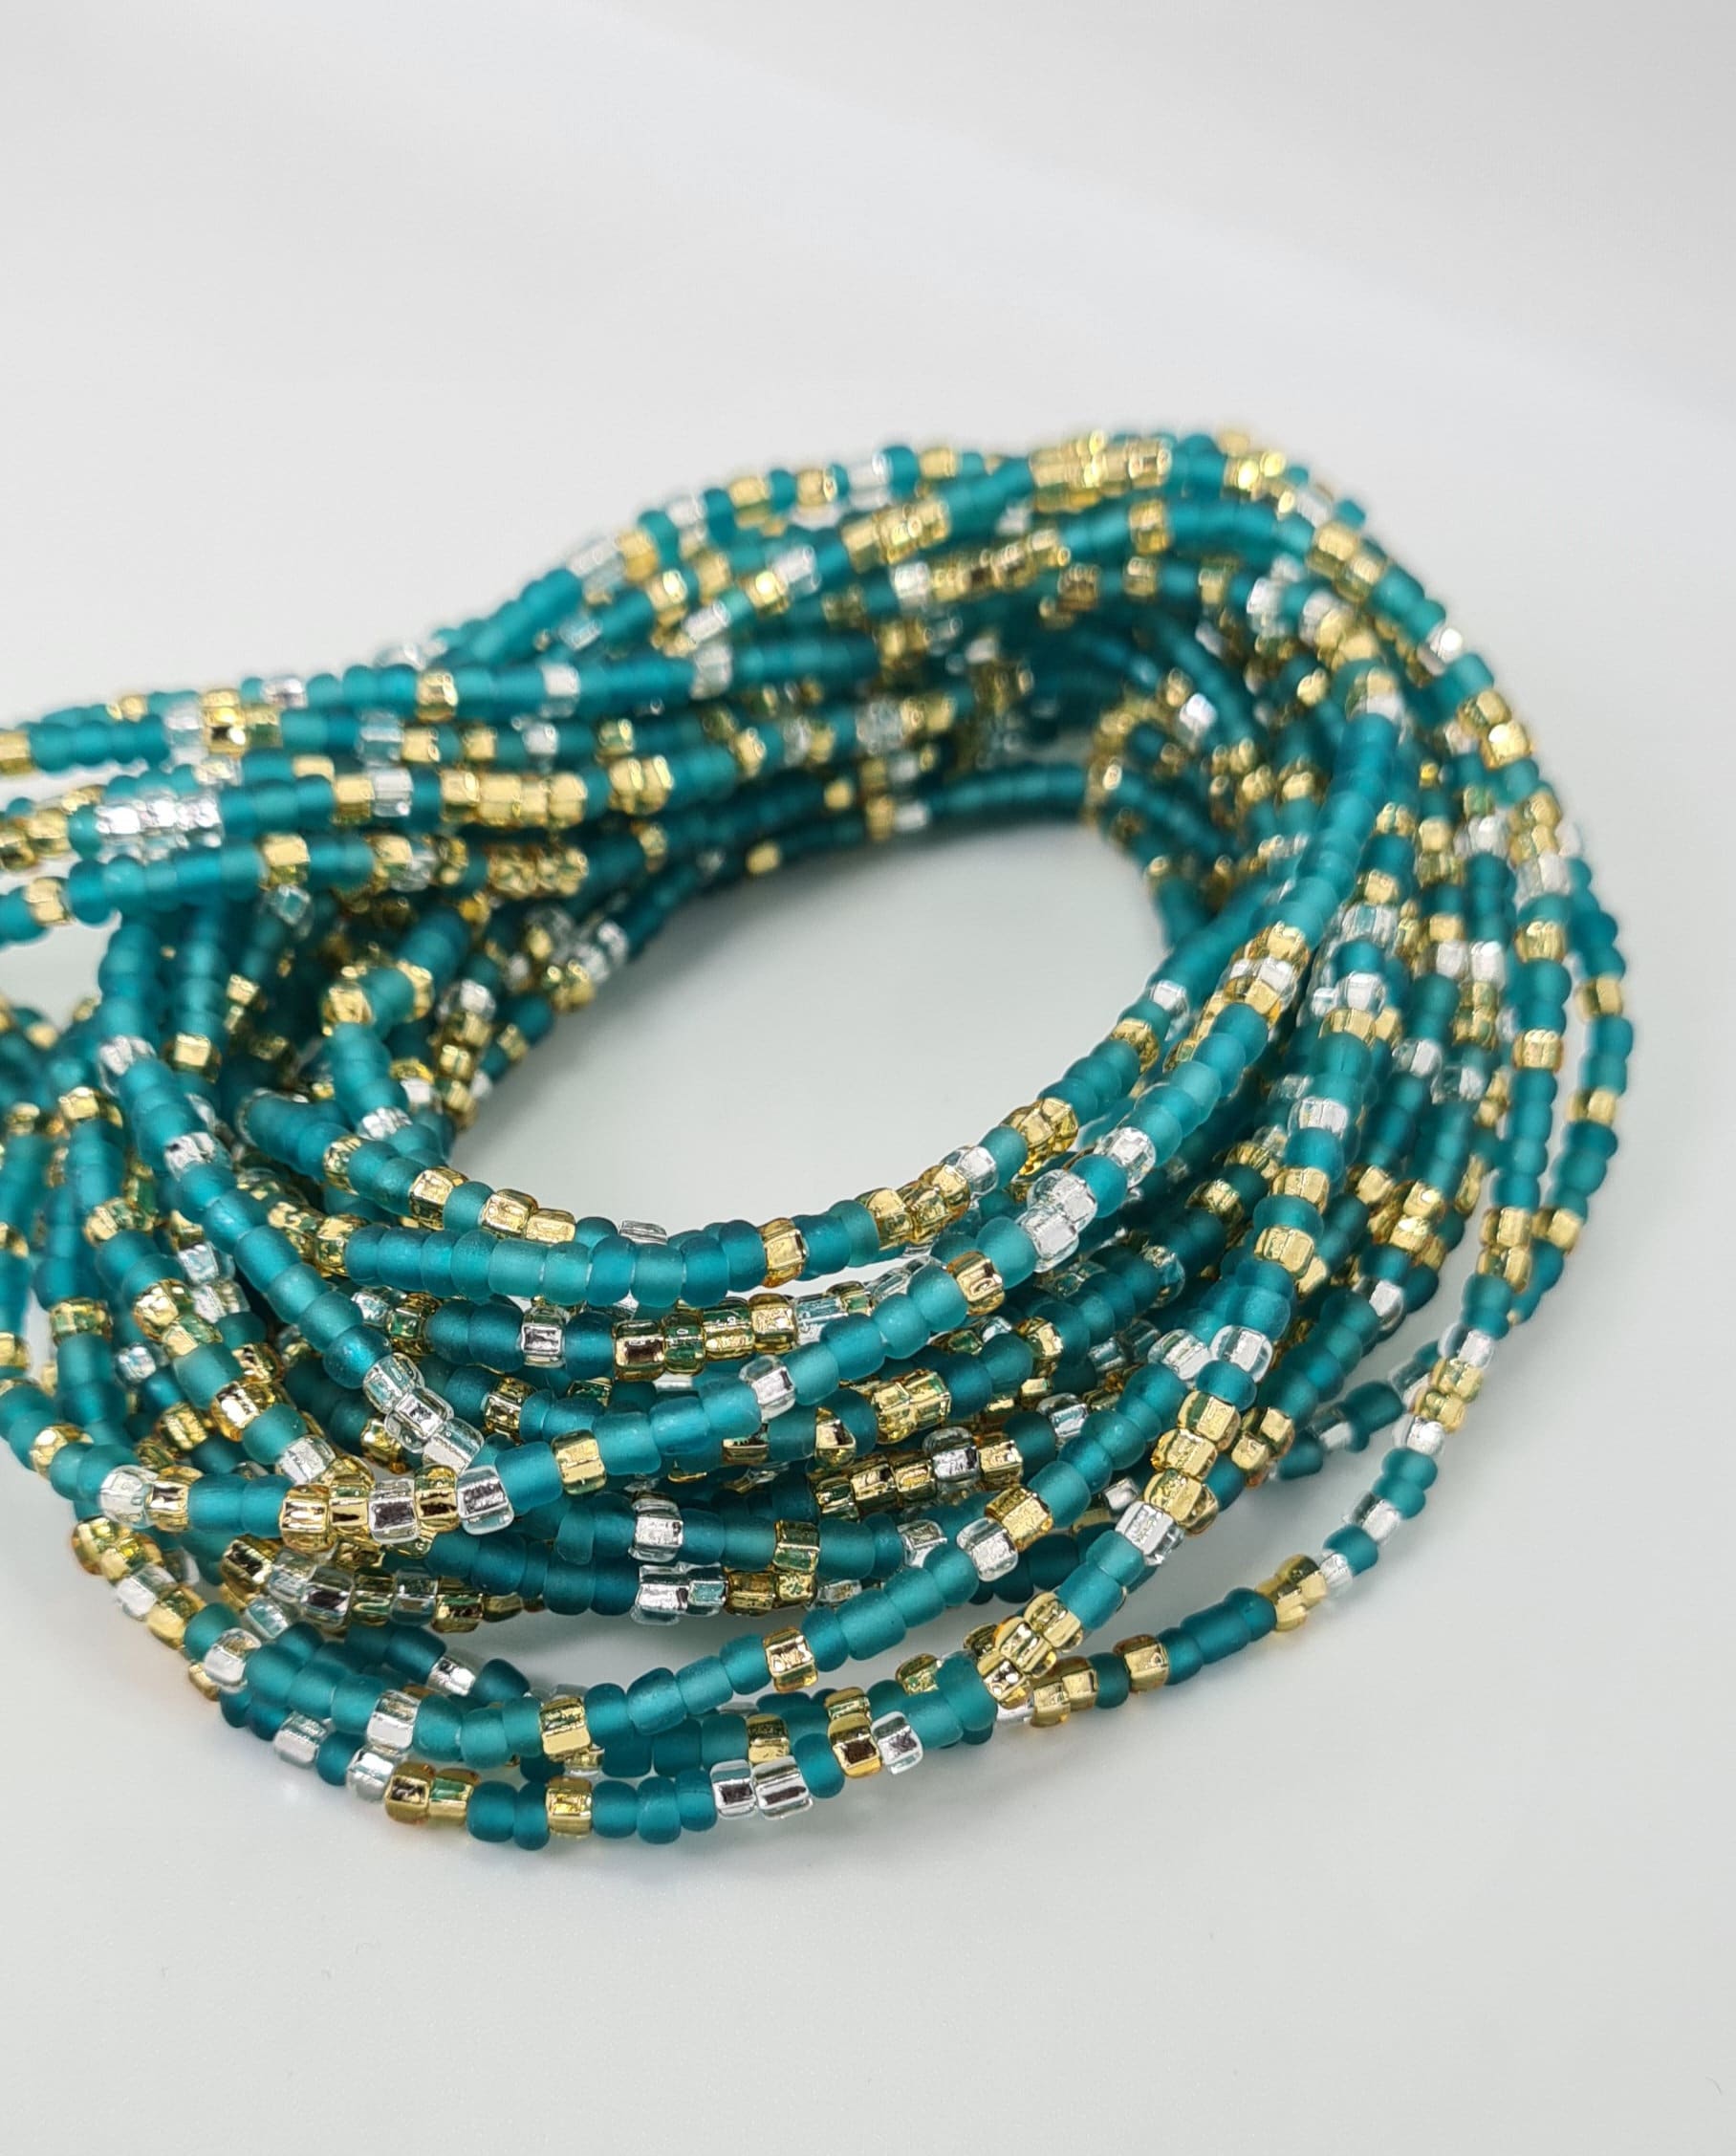 African sea Glass Beads From Ghana: Handmade Ethnic Beads From Powdered  Bottle Glass Fair Trade Round Green Beads RCY-RND-GRN-921 